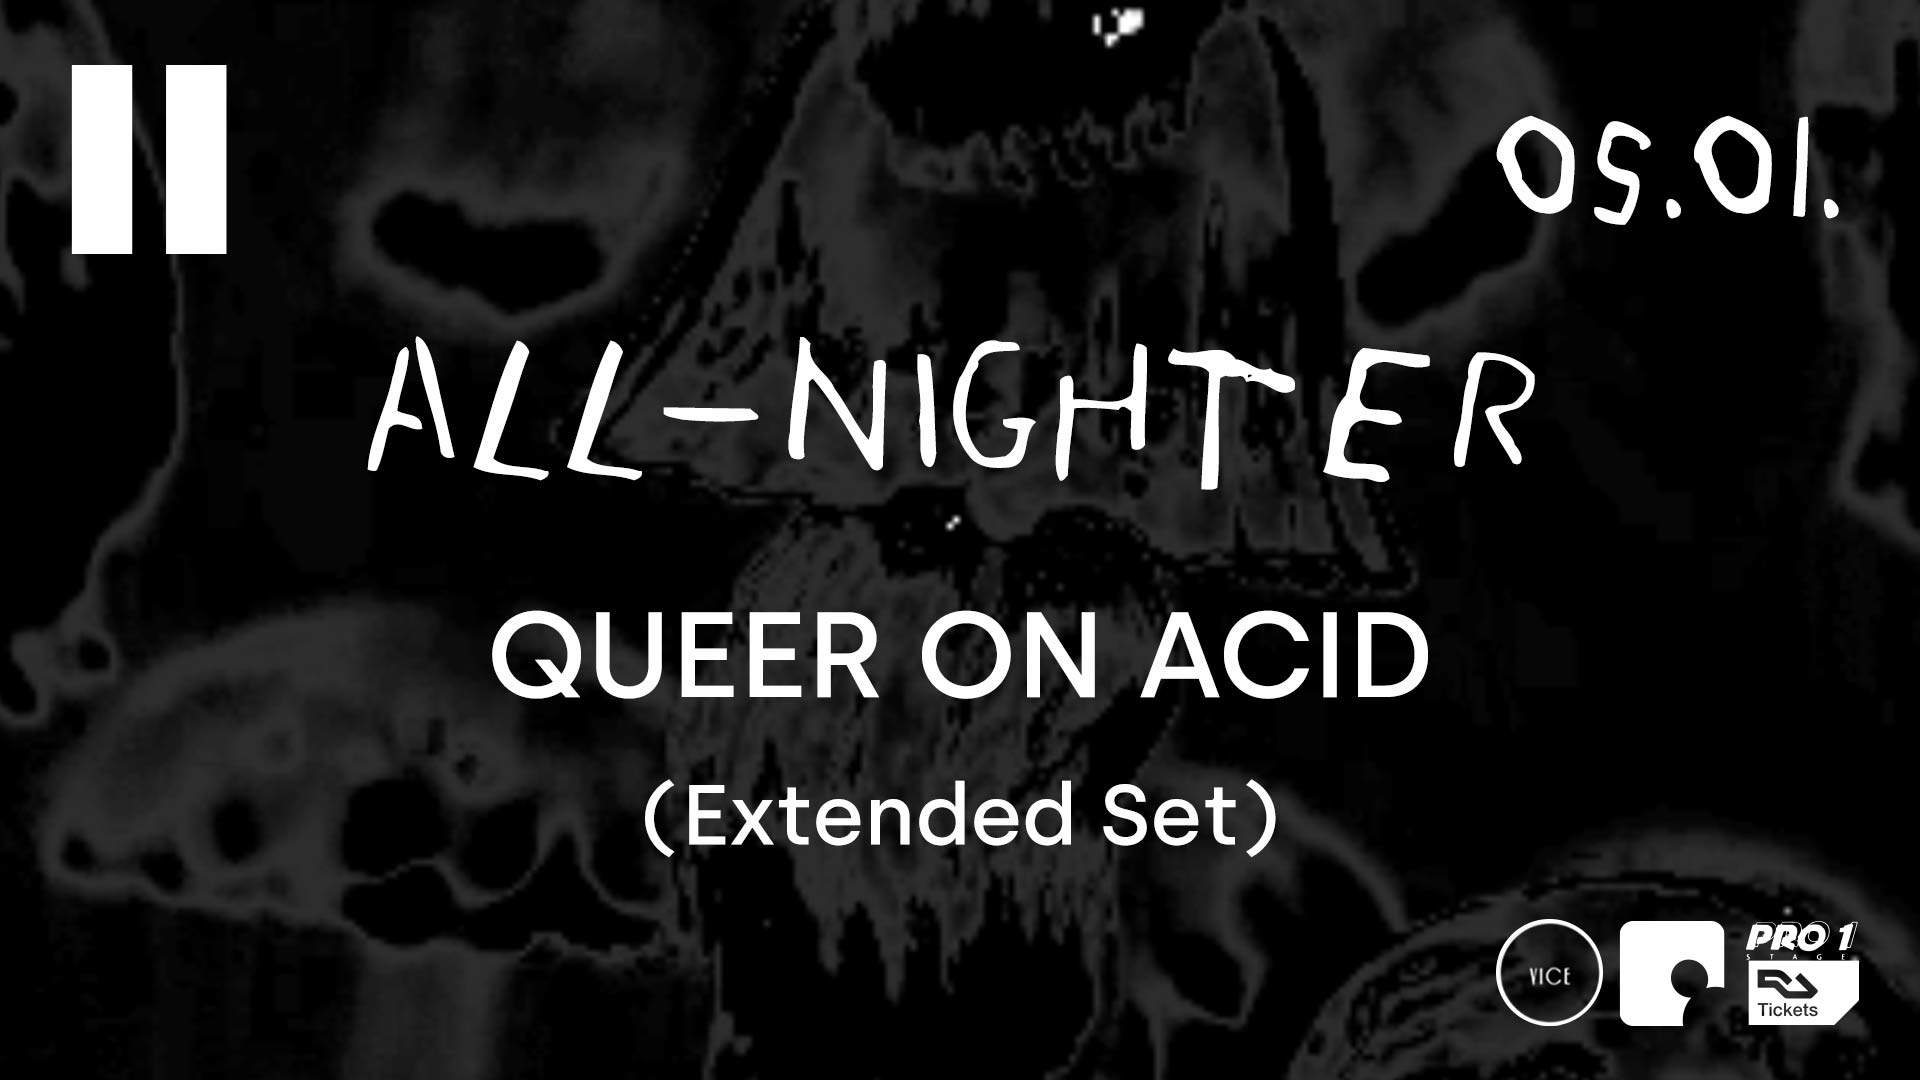 Queer On Acid 'ALL NIGHTER' - フライヤー表